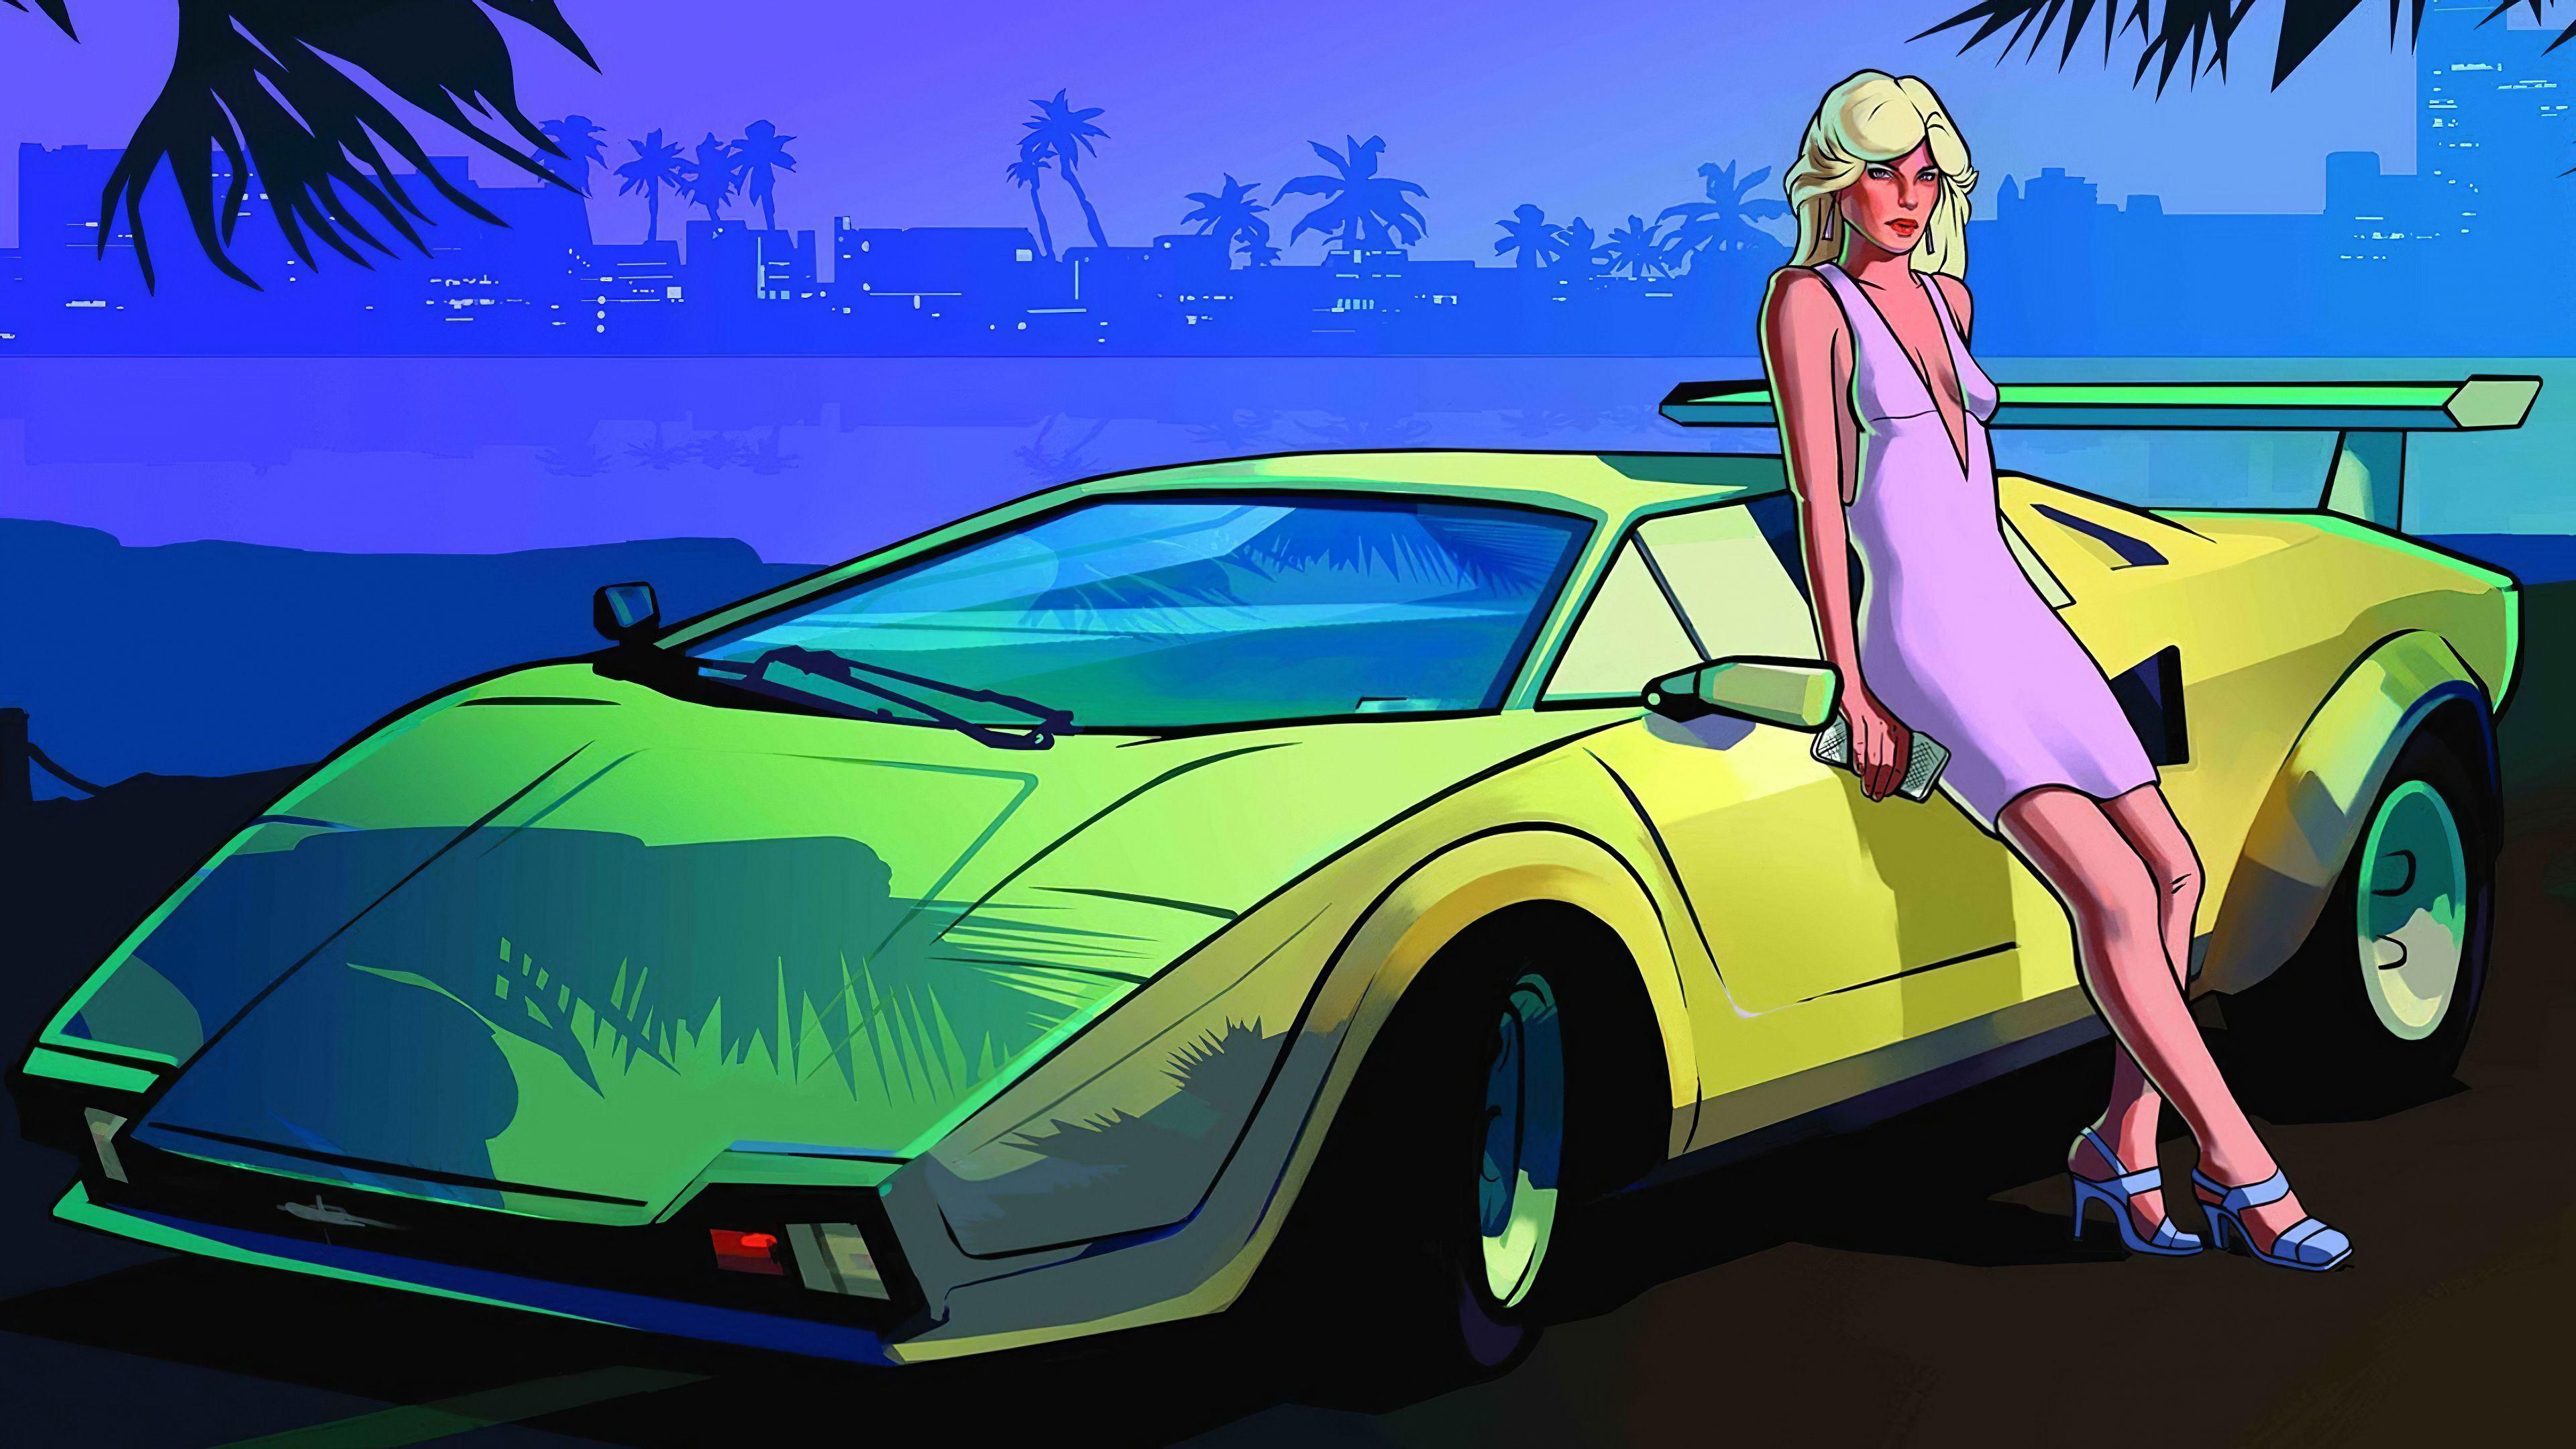 Grand Theft Auto Women Wallpapers Wallpaper Cave 4884